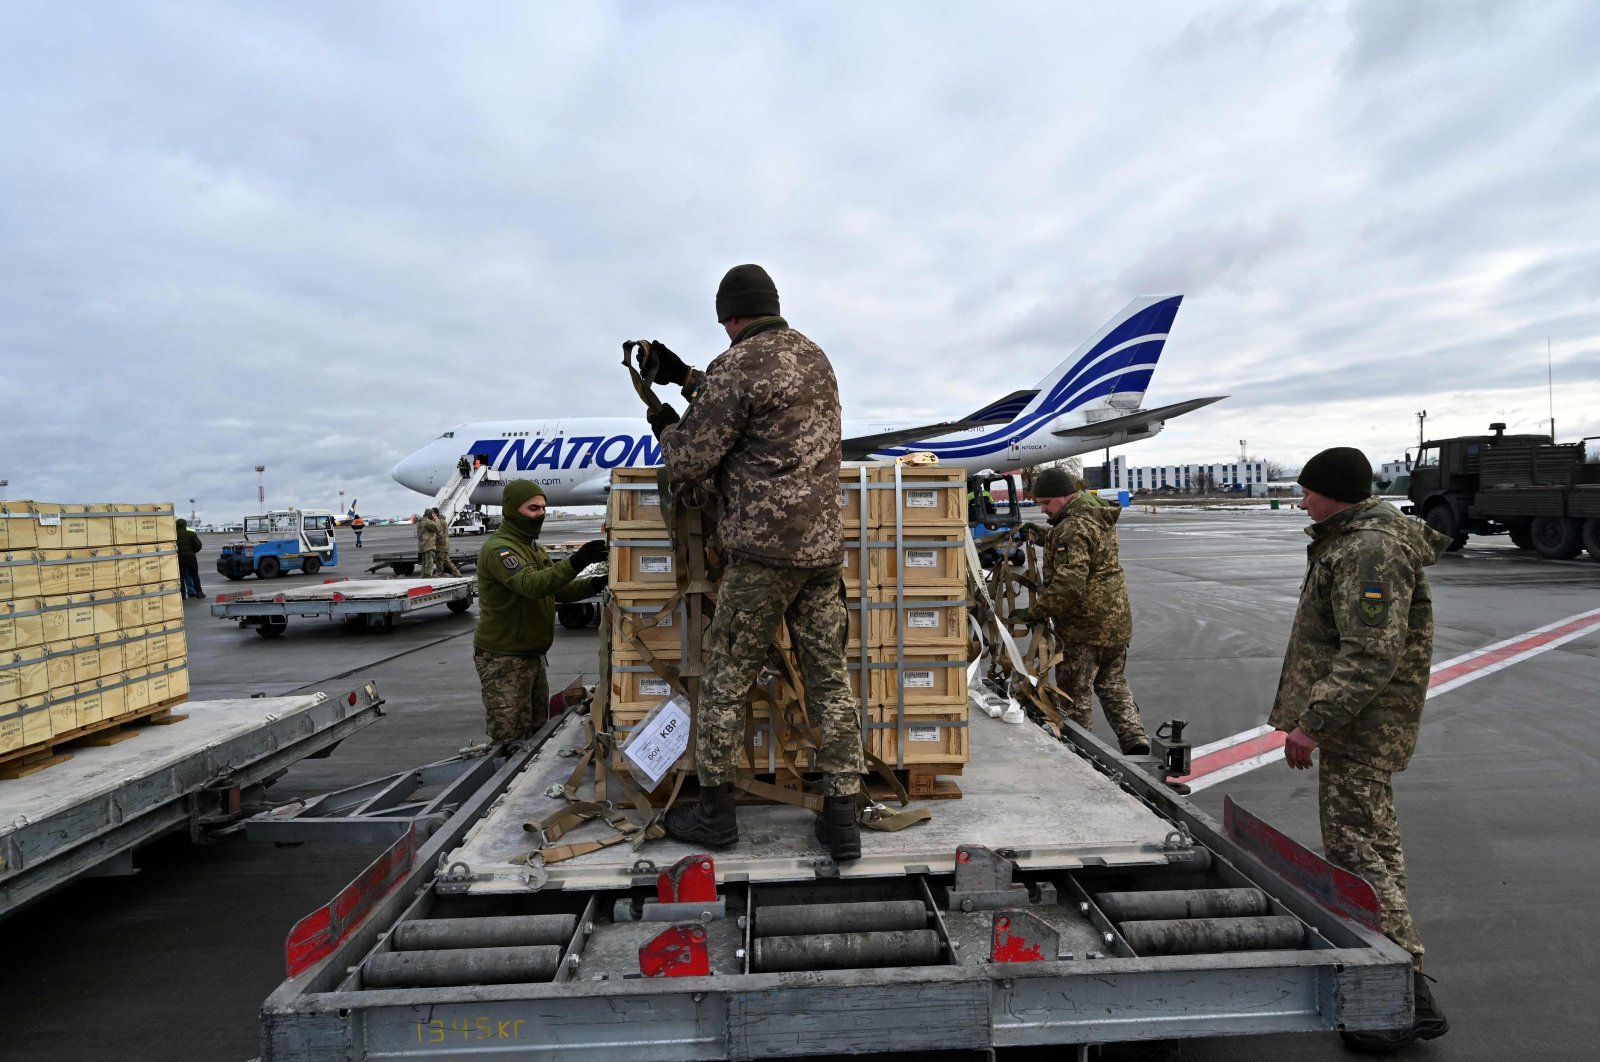 Servicemen of Ukrainian Military Forces unload a Boeing 747-412 of National Airlines carrying U.S. military aid at Kyiv&#039;s Boryspil airport on Feb. 9, 2022. (AFP File Photo)